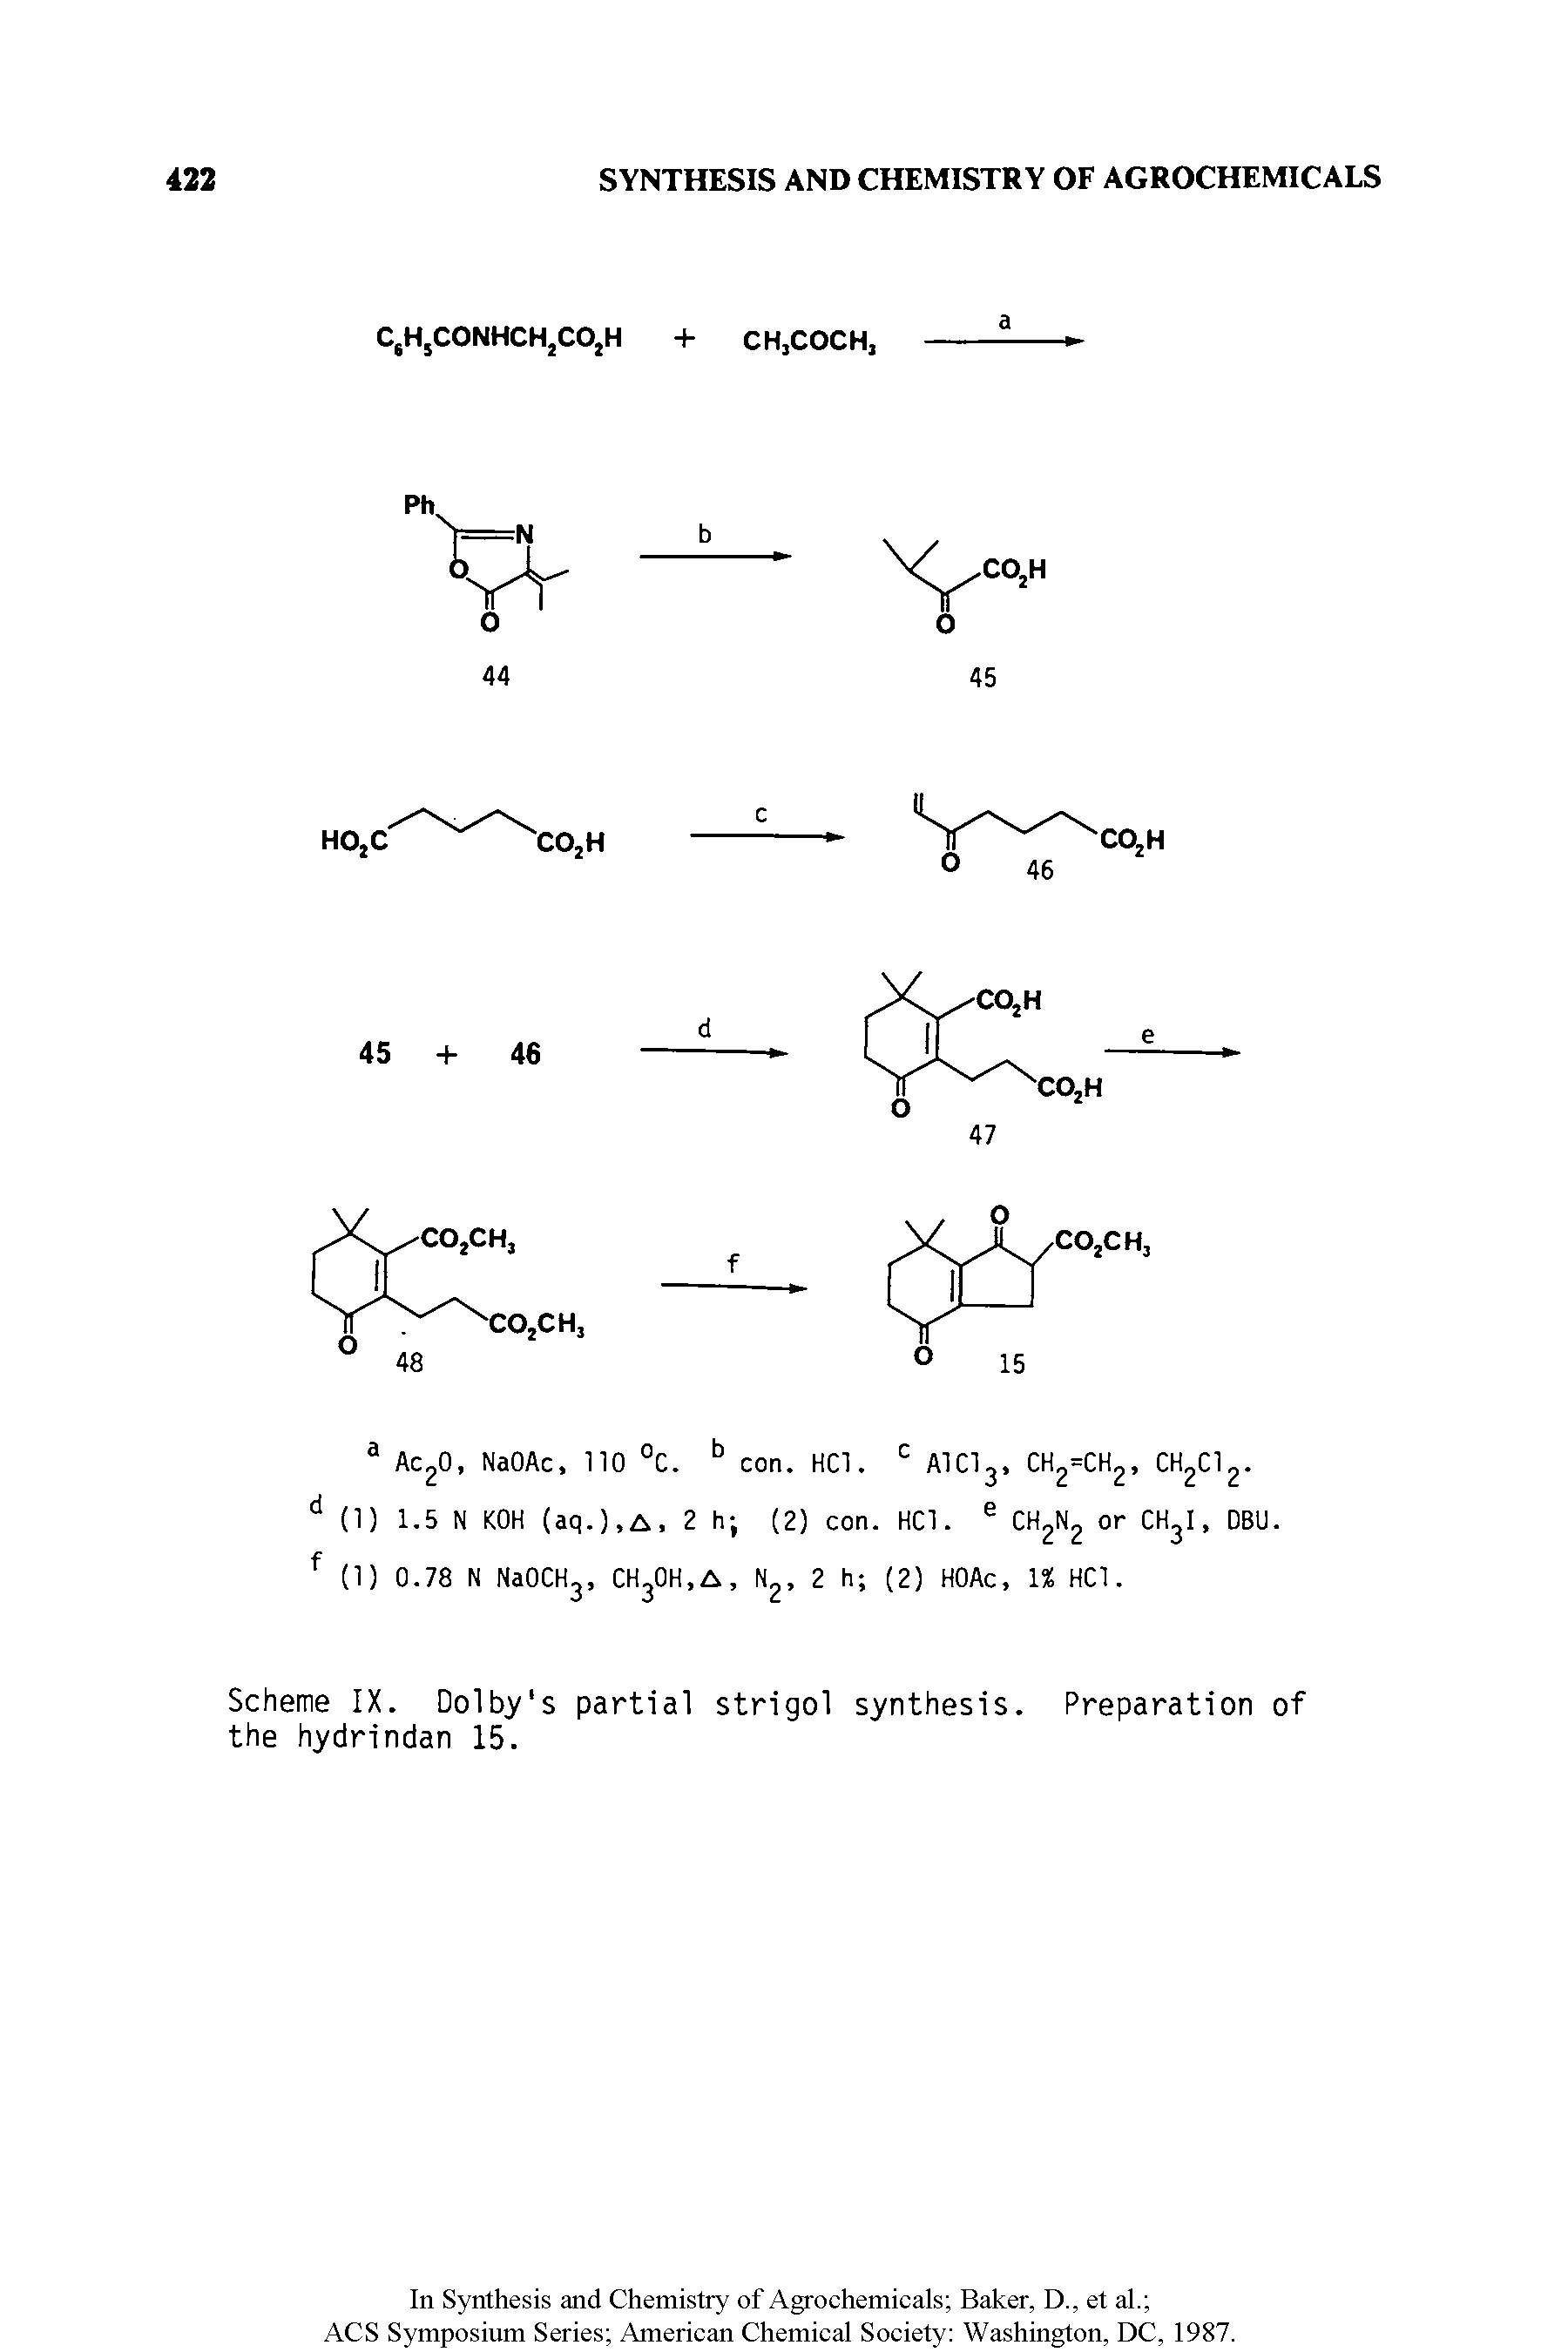 Scheme IX. Dolby s partial strigol synthesis. Preparation of the hydrindan 15.